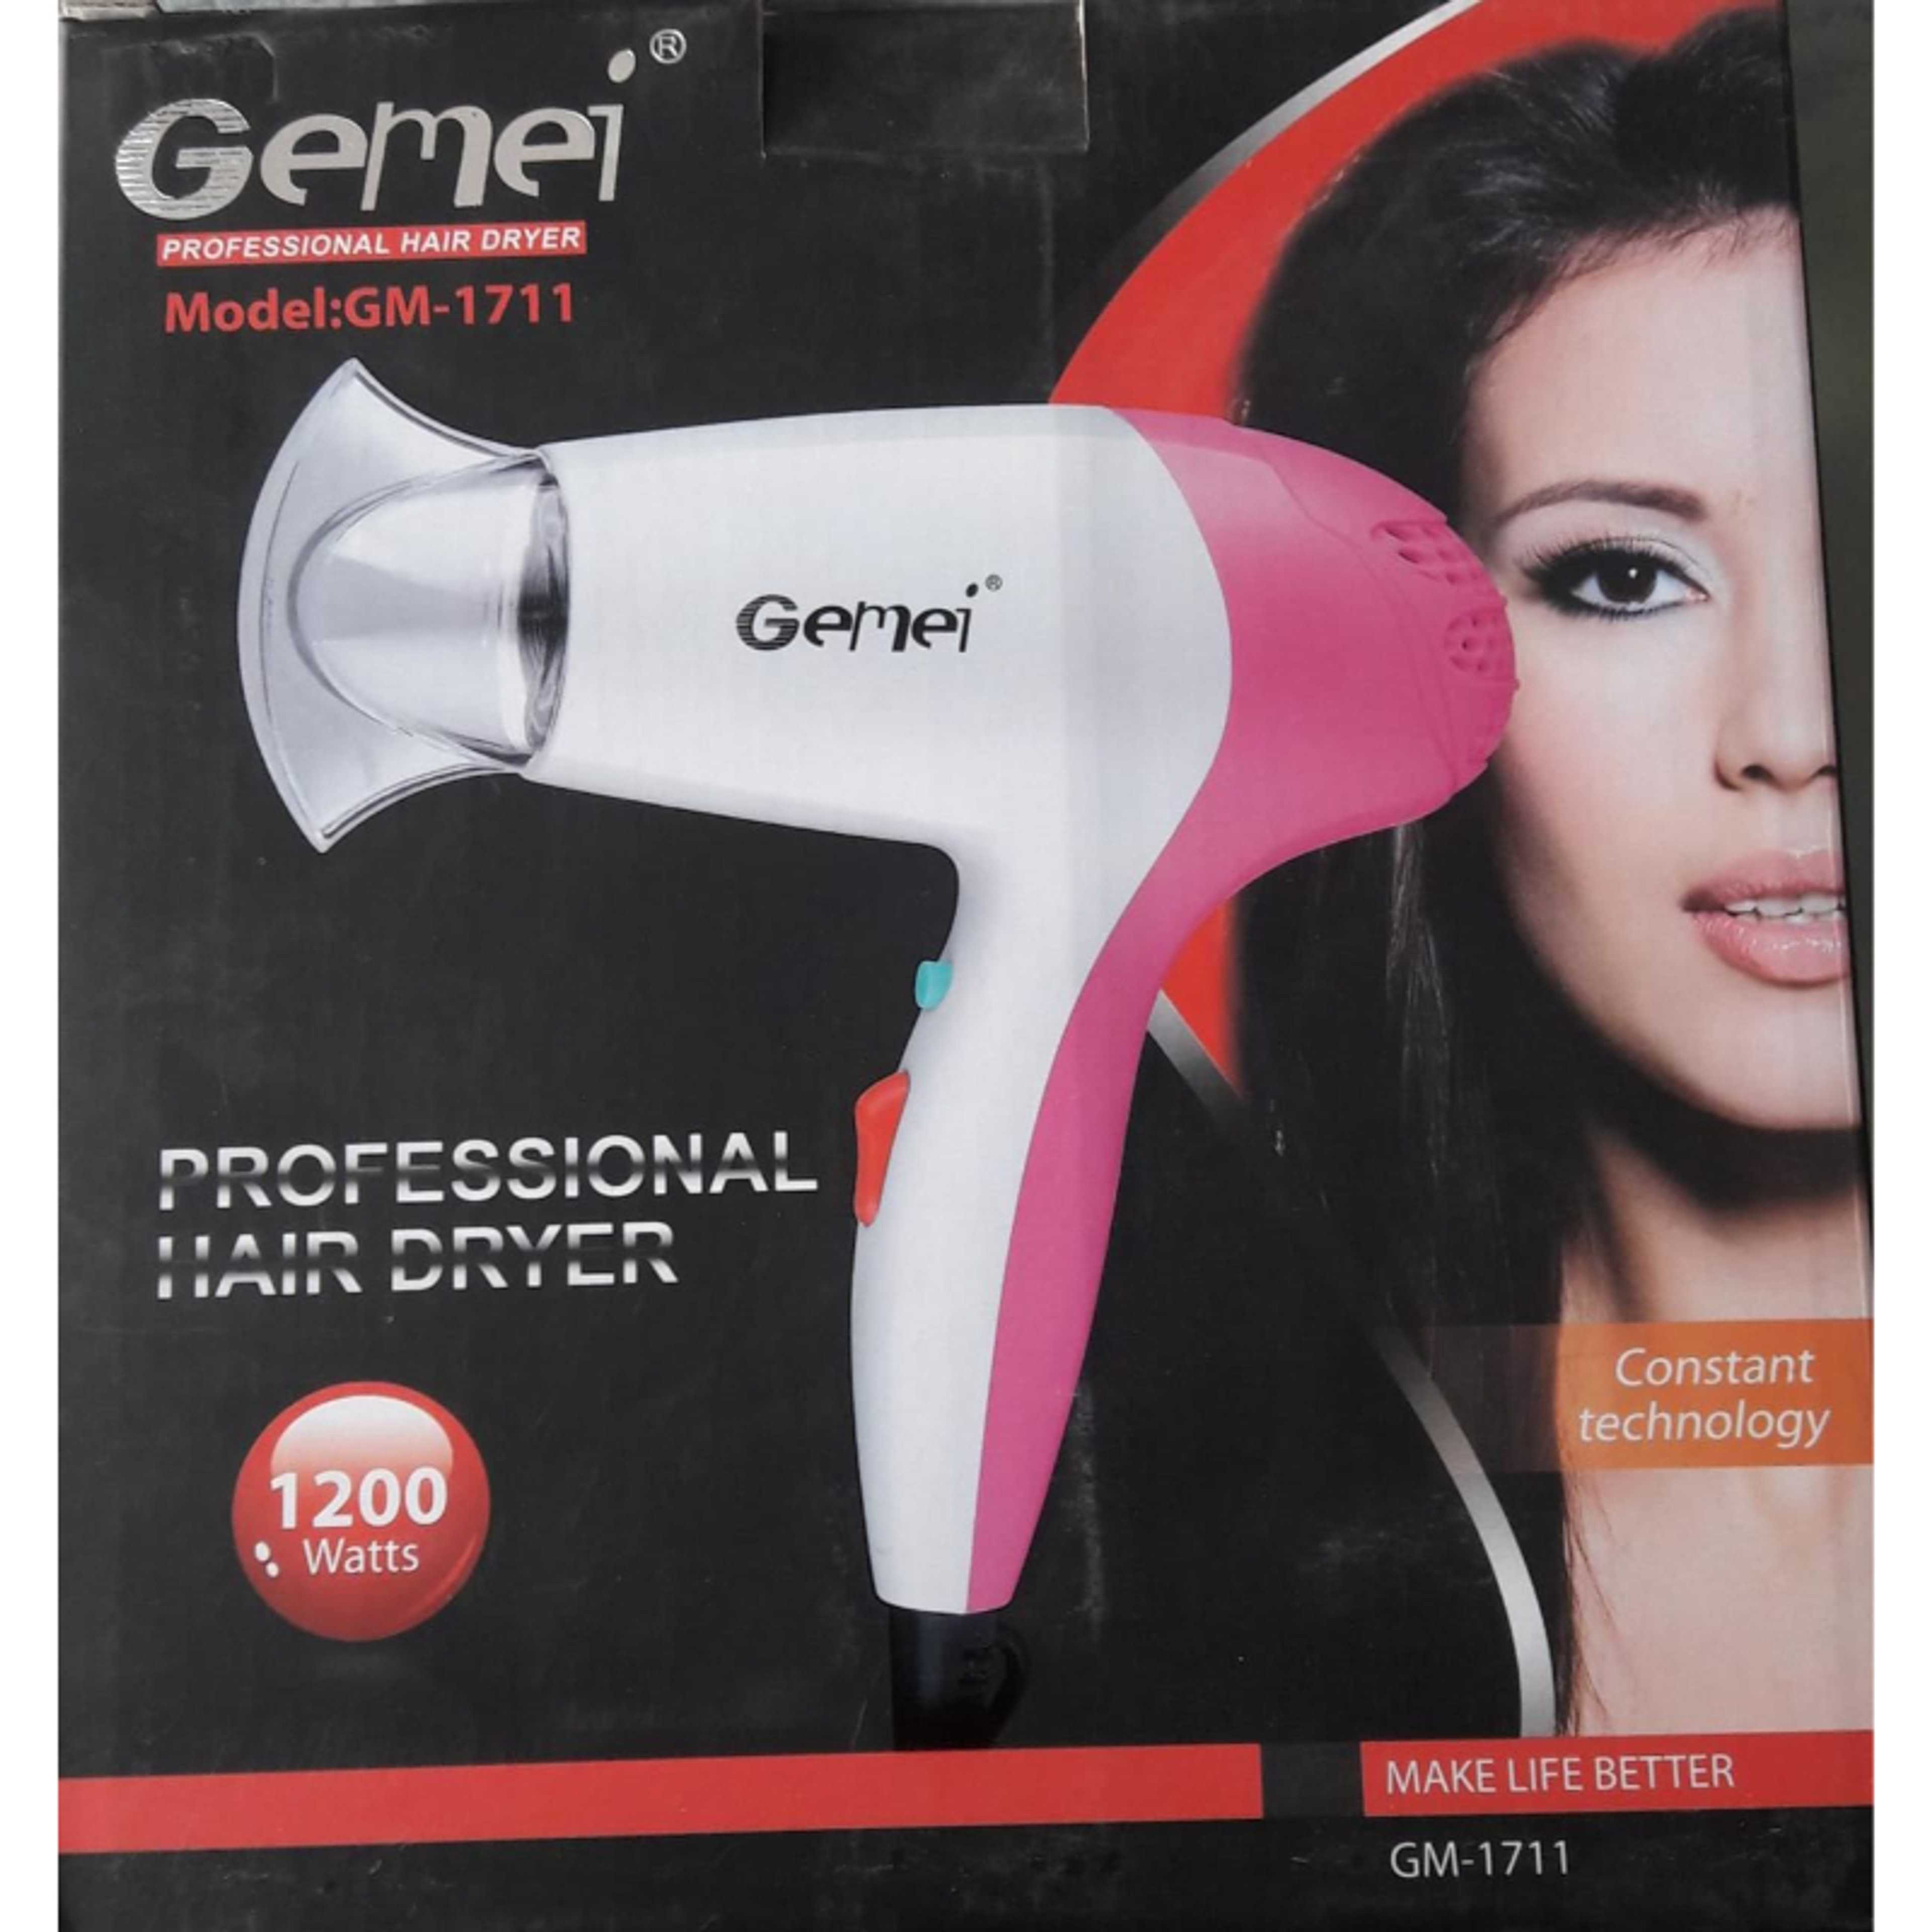 Gemei GM-1711 Hair Dryer for both men and women